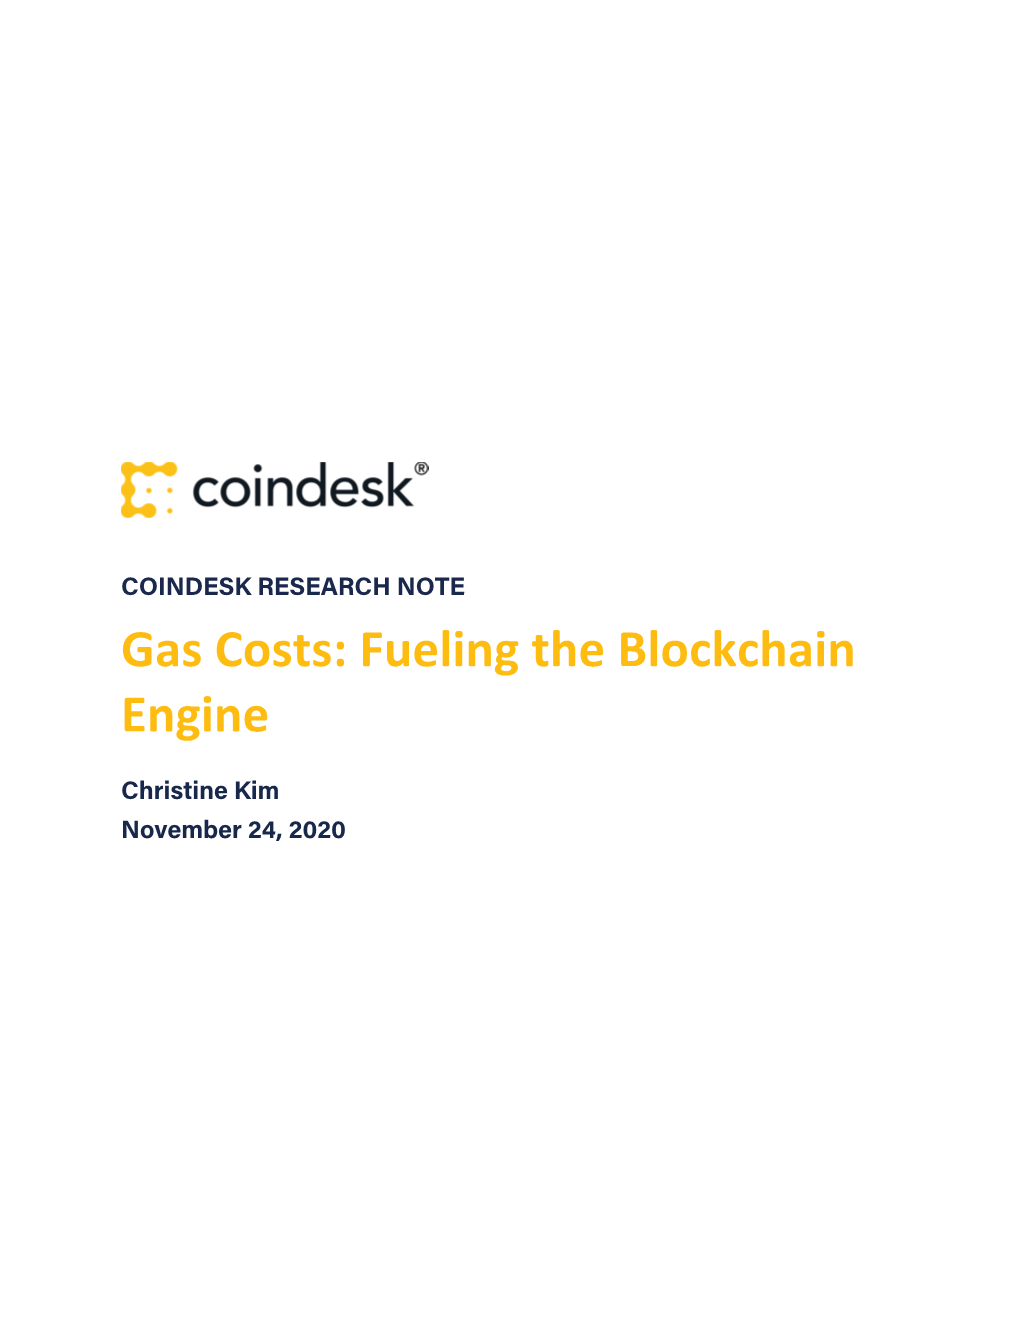 Gas Costs: Fueling the Blockchain Engine